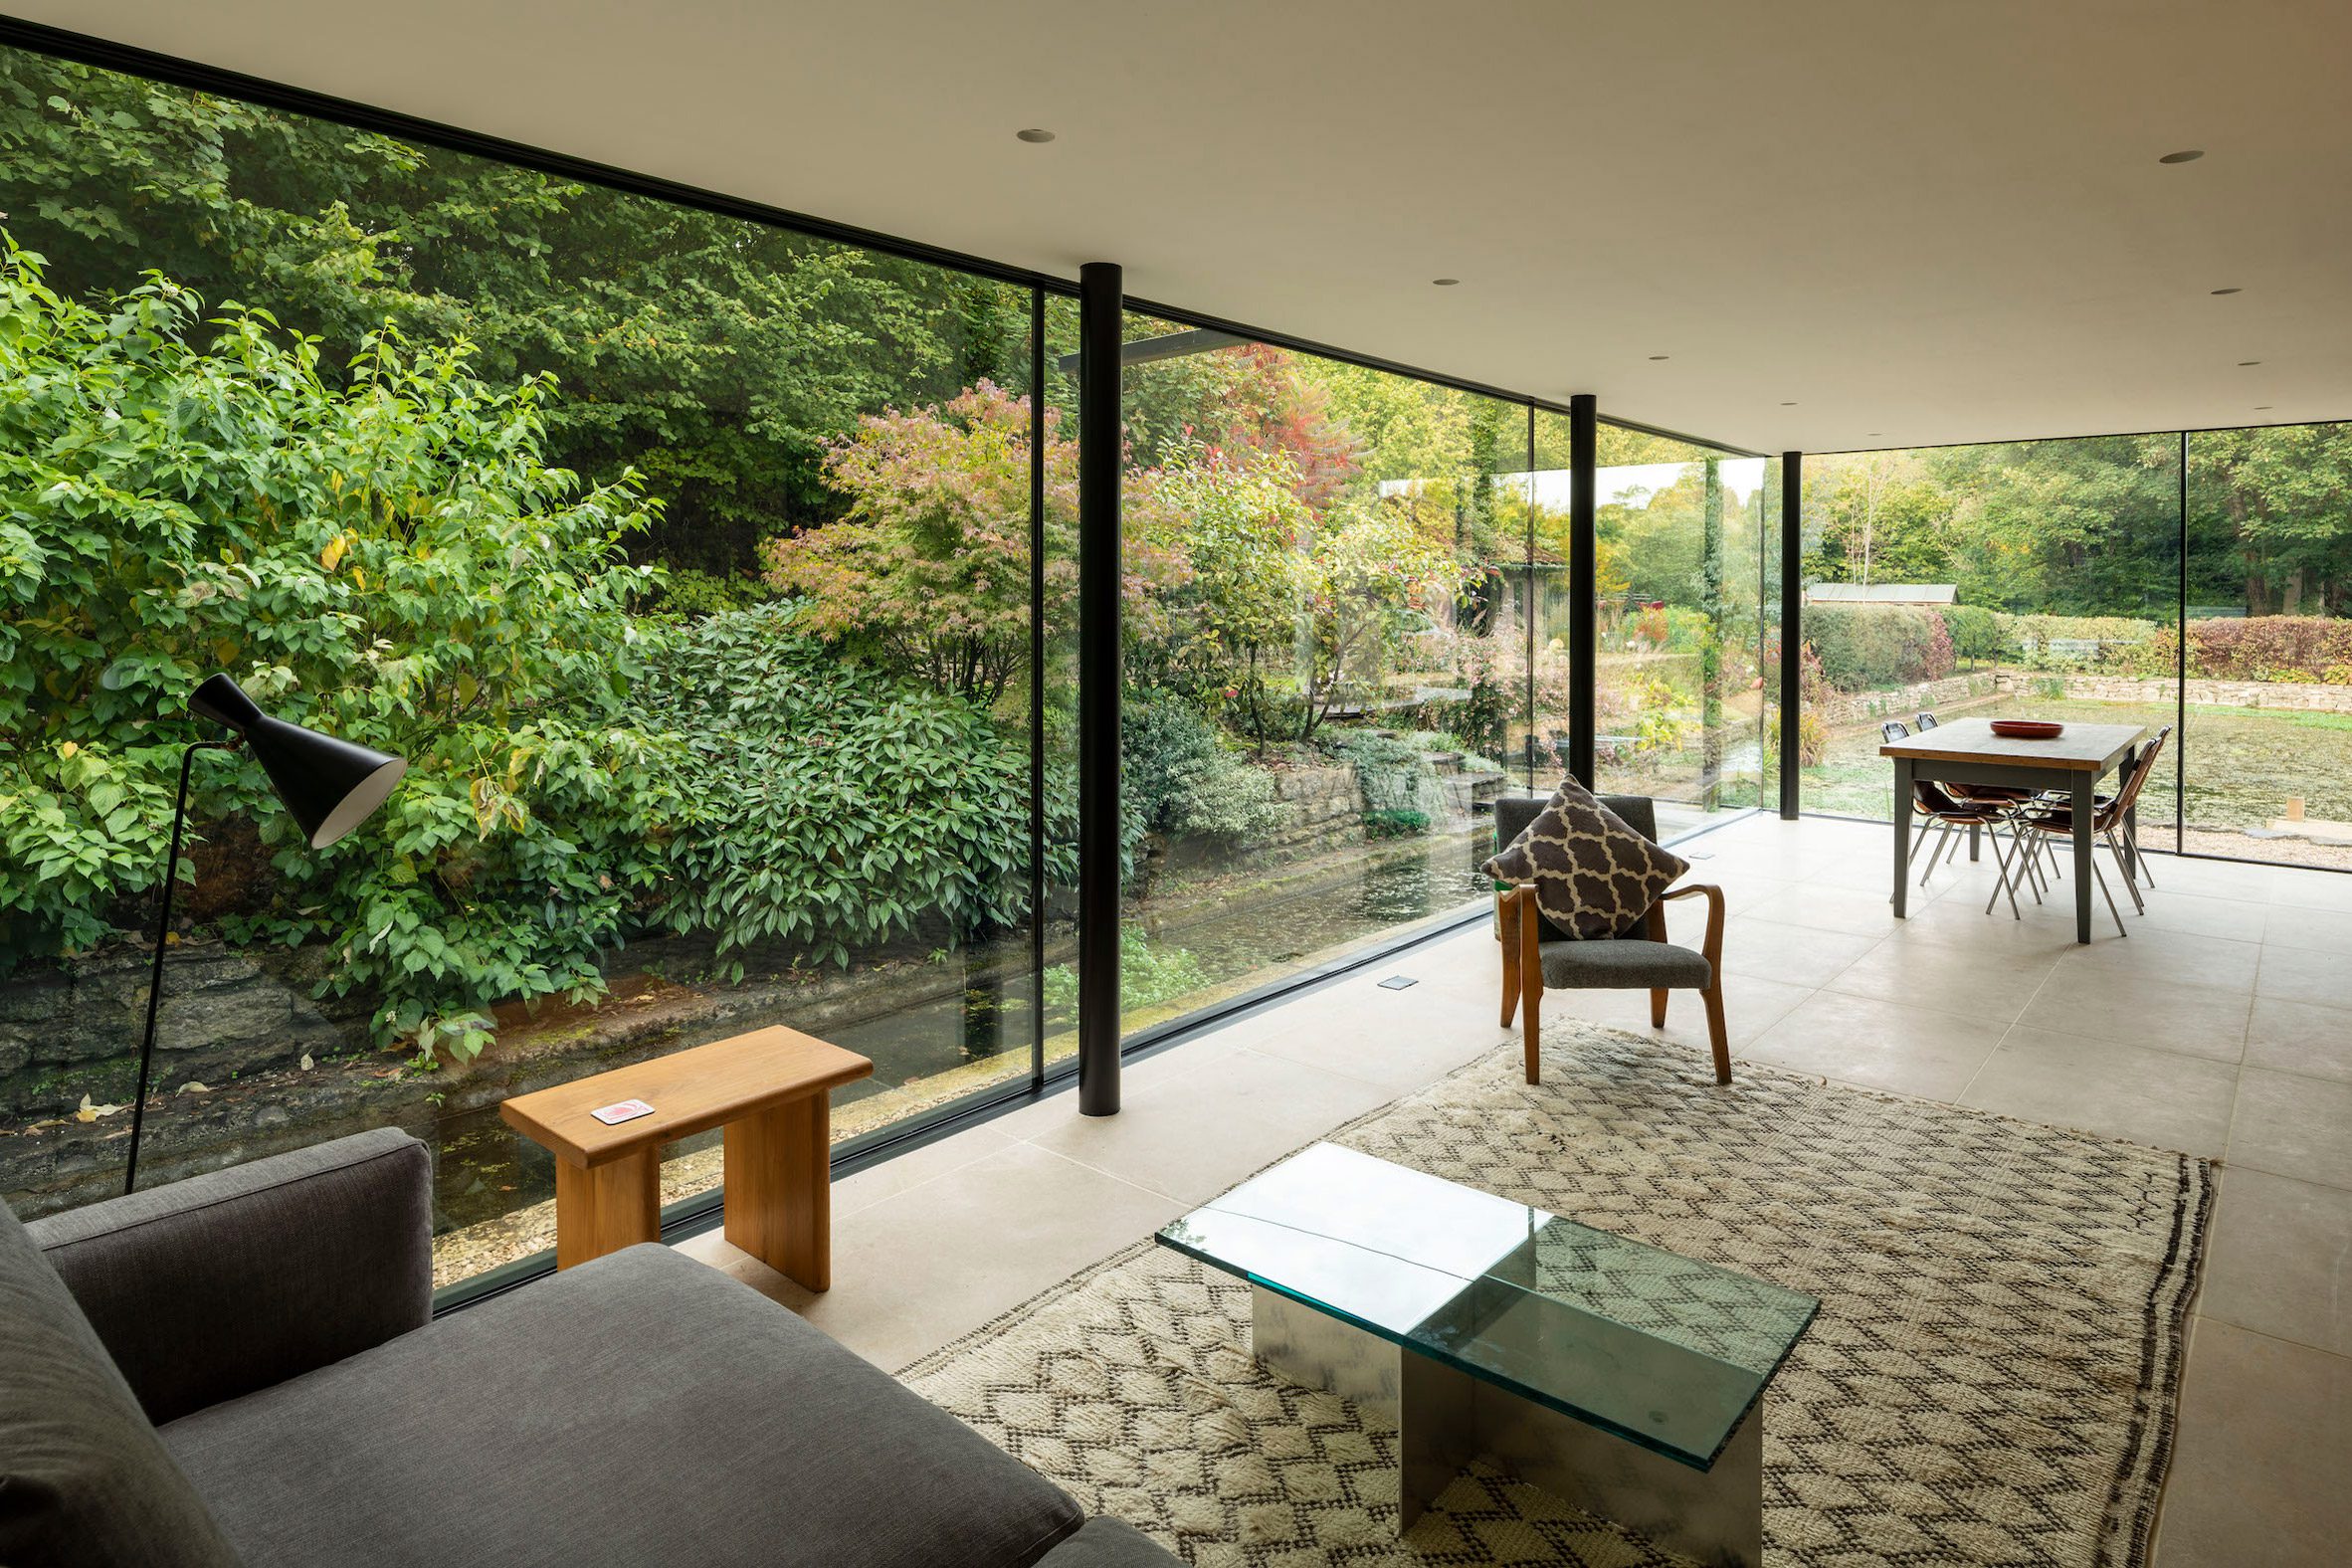 The extension brings more light and space to the living area